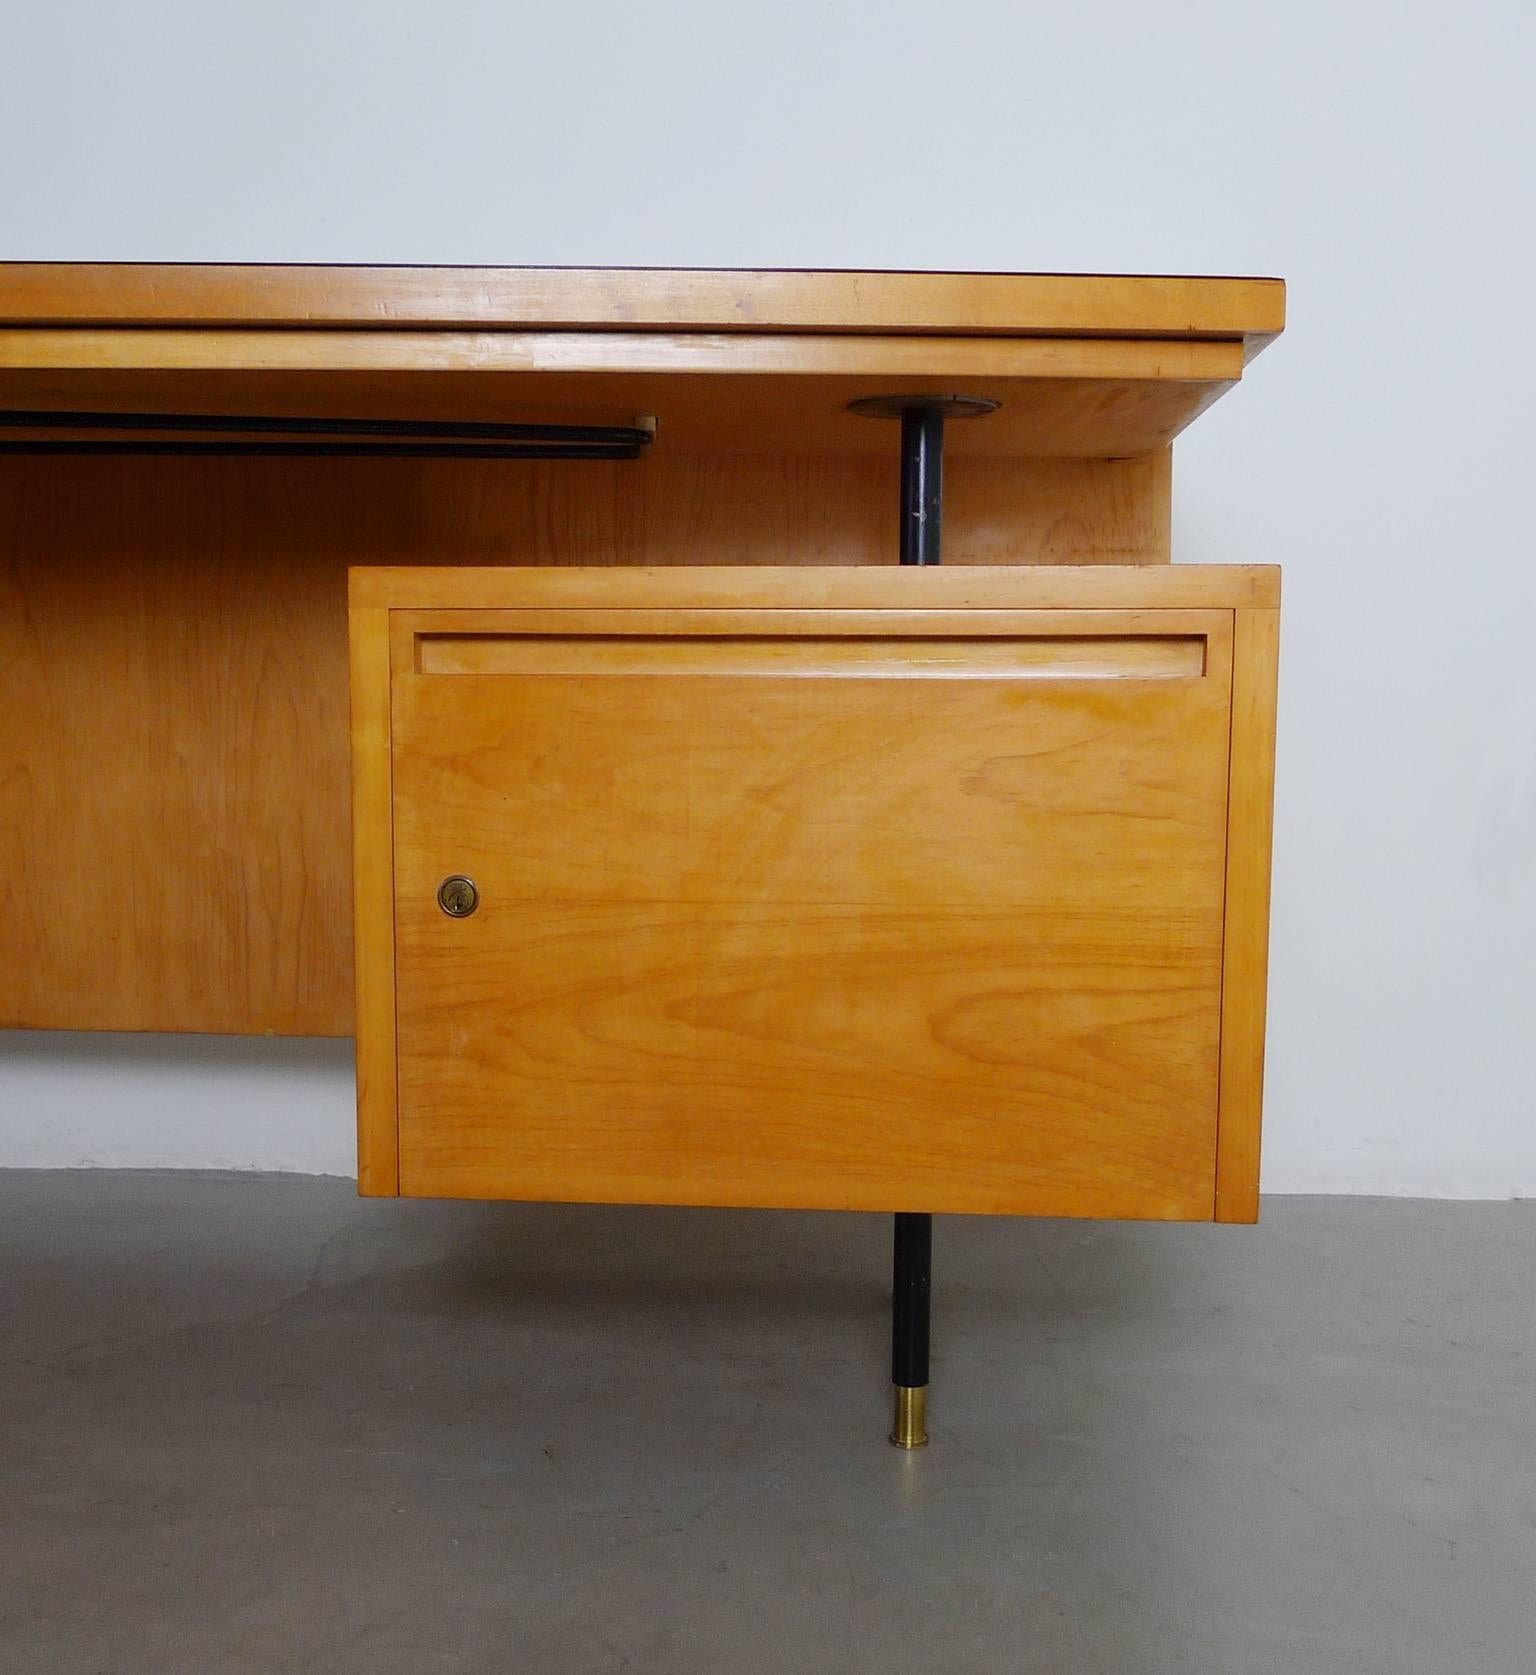 Birch 1950s Writing Desk with Traversable Plate from Switzerland